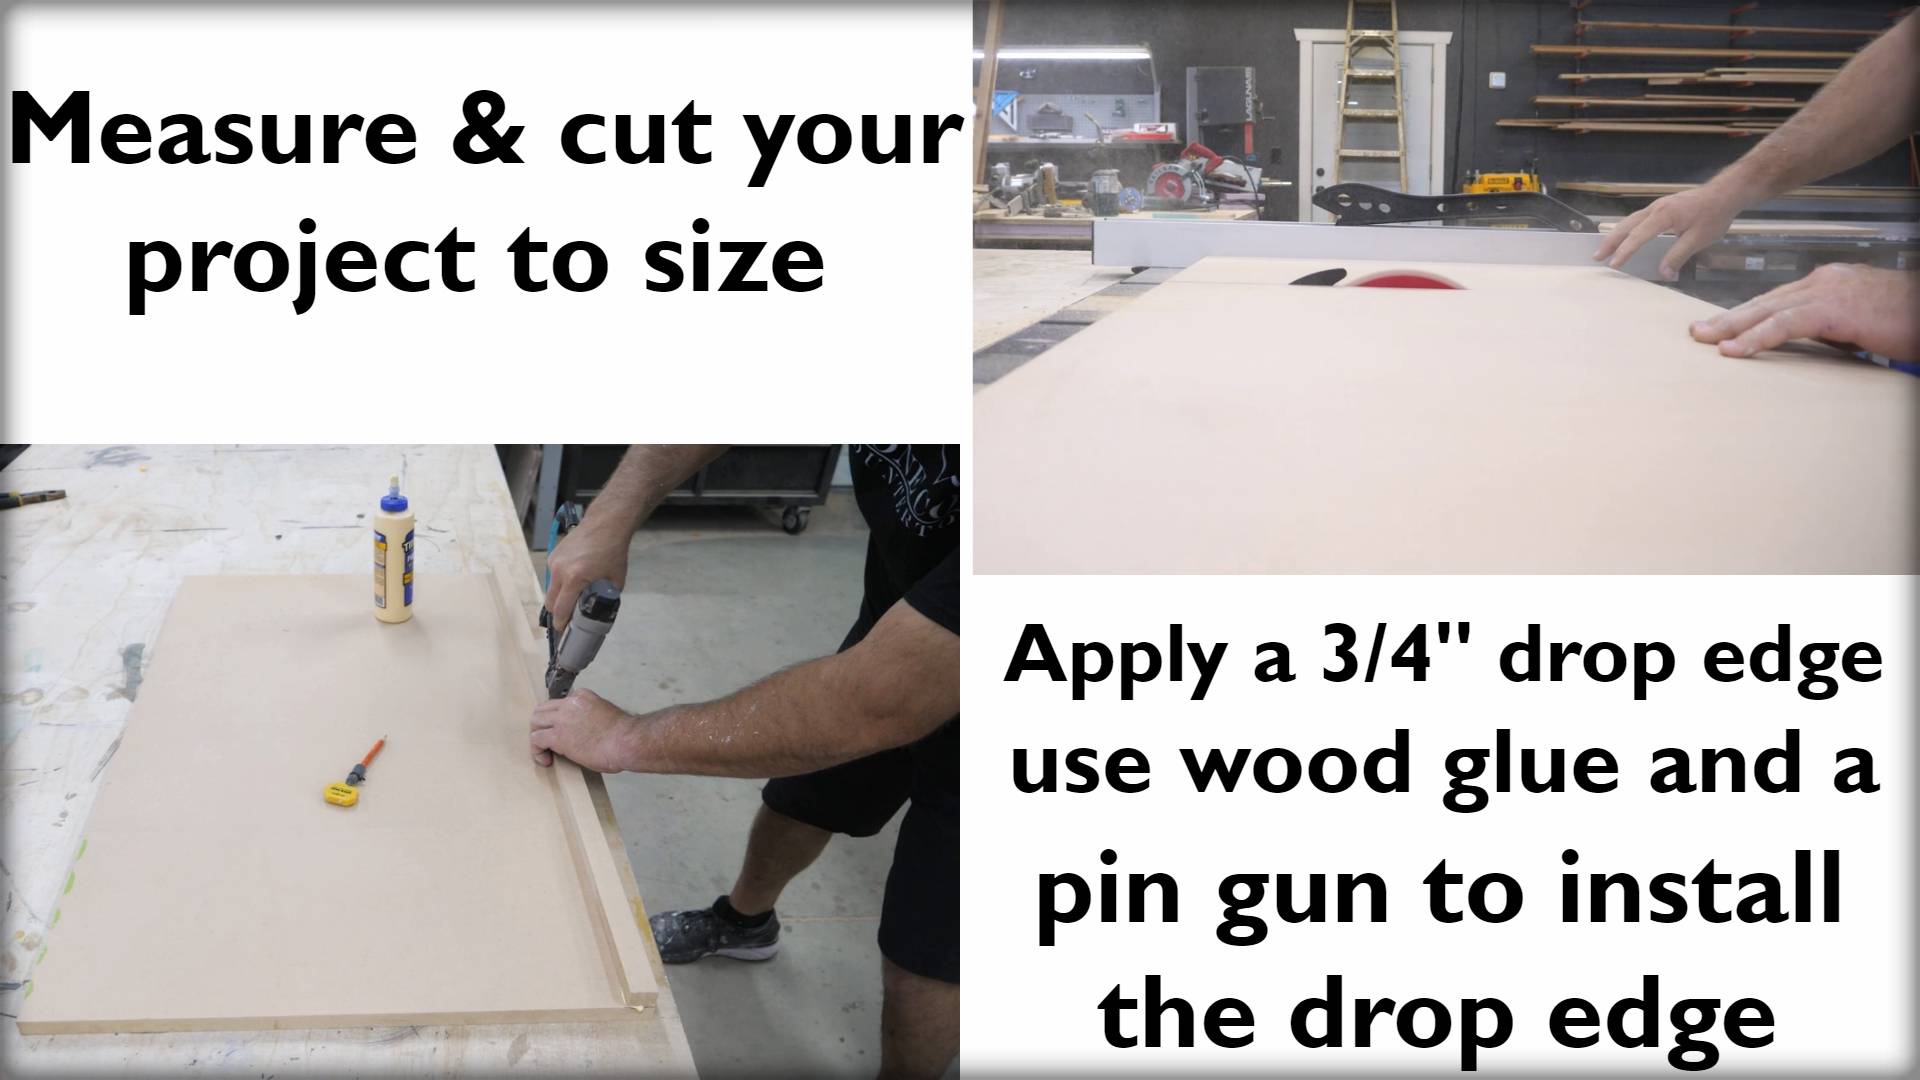 Measure and cut your project to size. Apply a 3/4